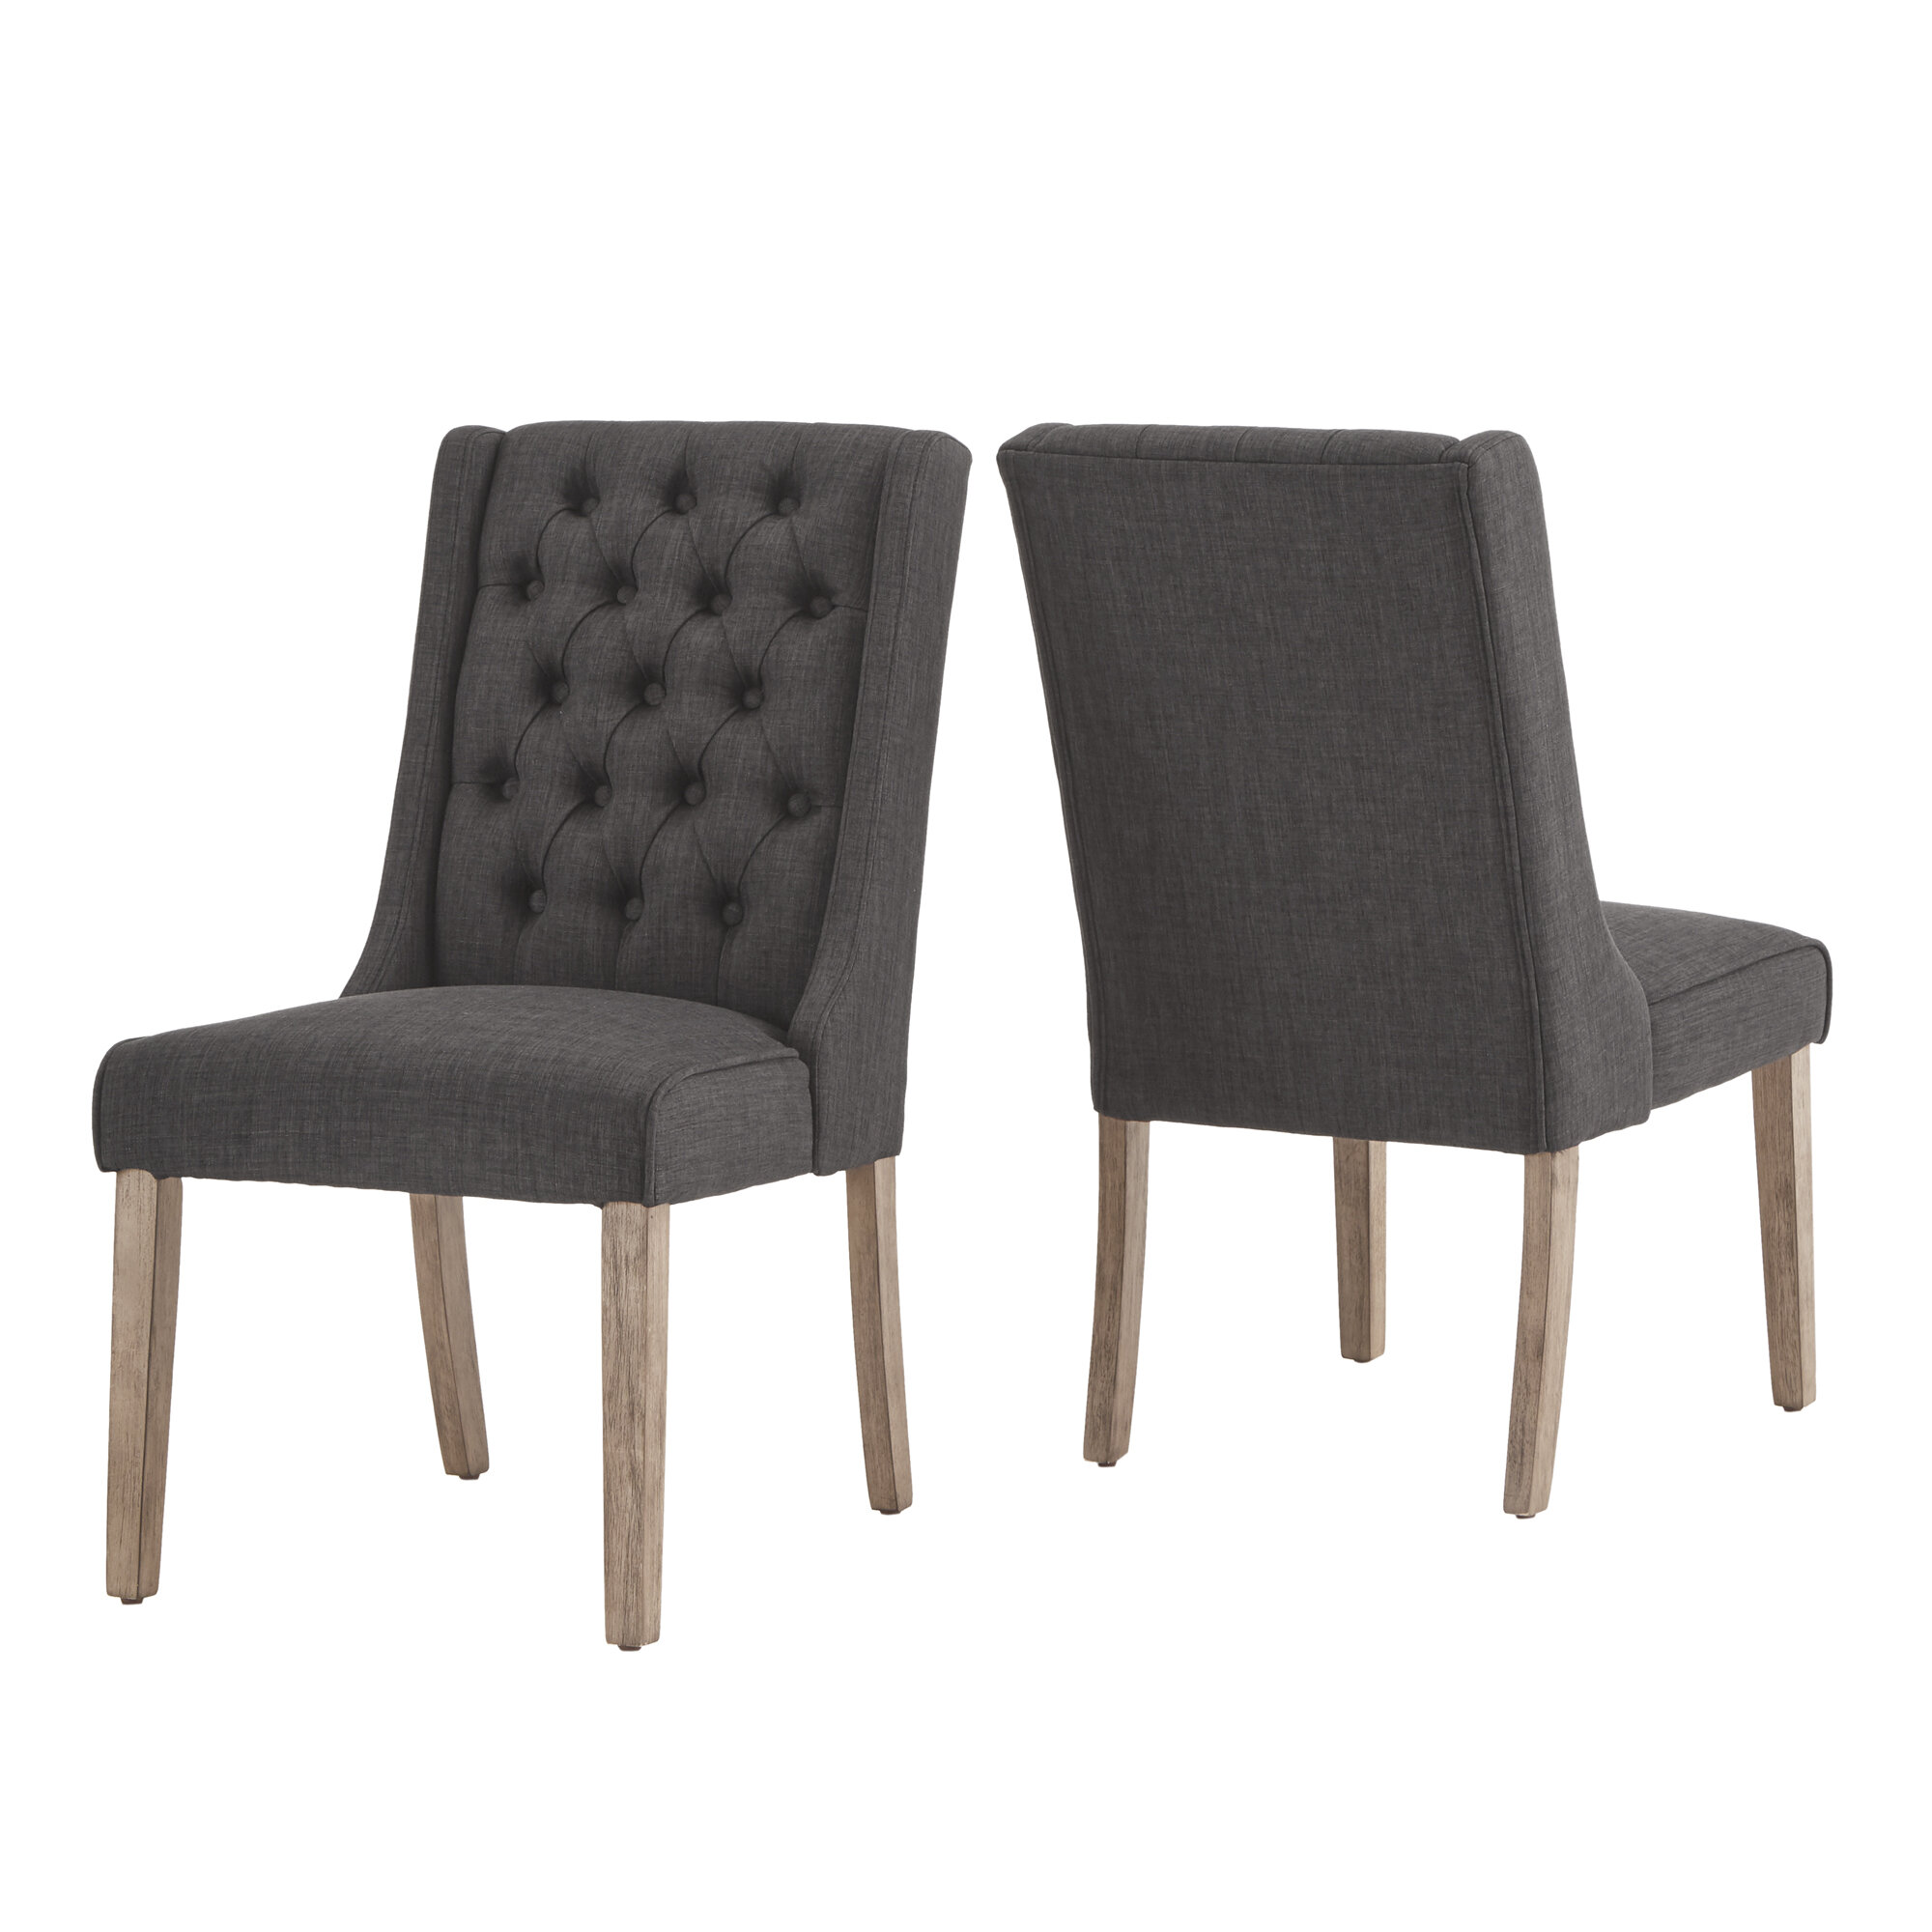 Harold Tufted Upholstered Side Chair Reviews Joss Main